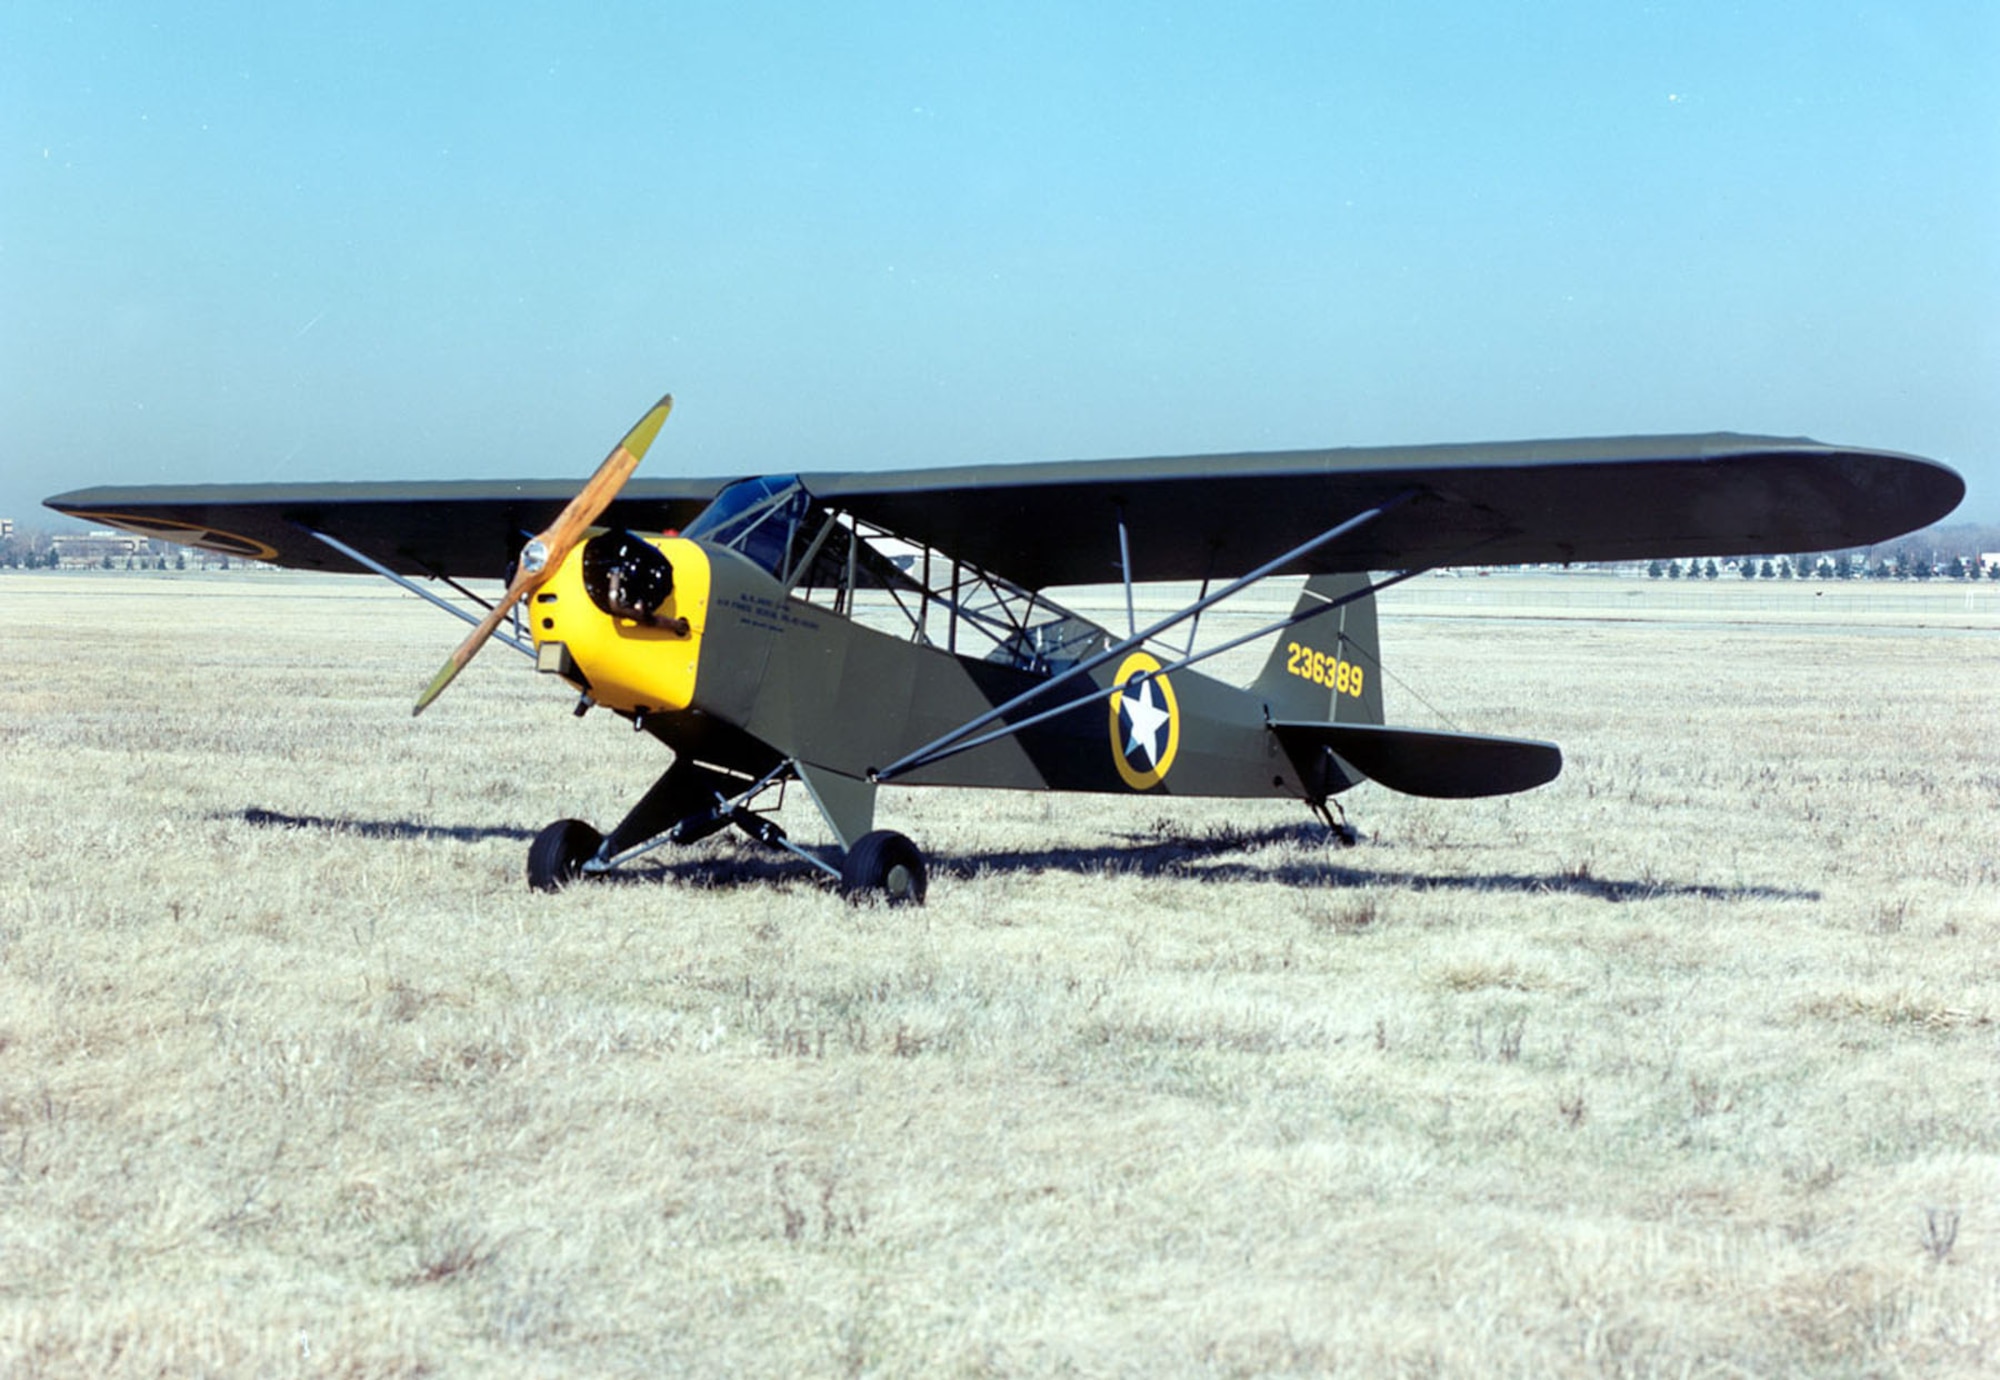 DAYTON, Ohio -- Piper L-4 "Grasshopper" at the National Museum of the United States Air Force. (U.S. Air Force photo)